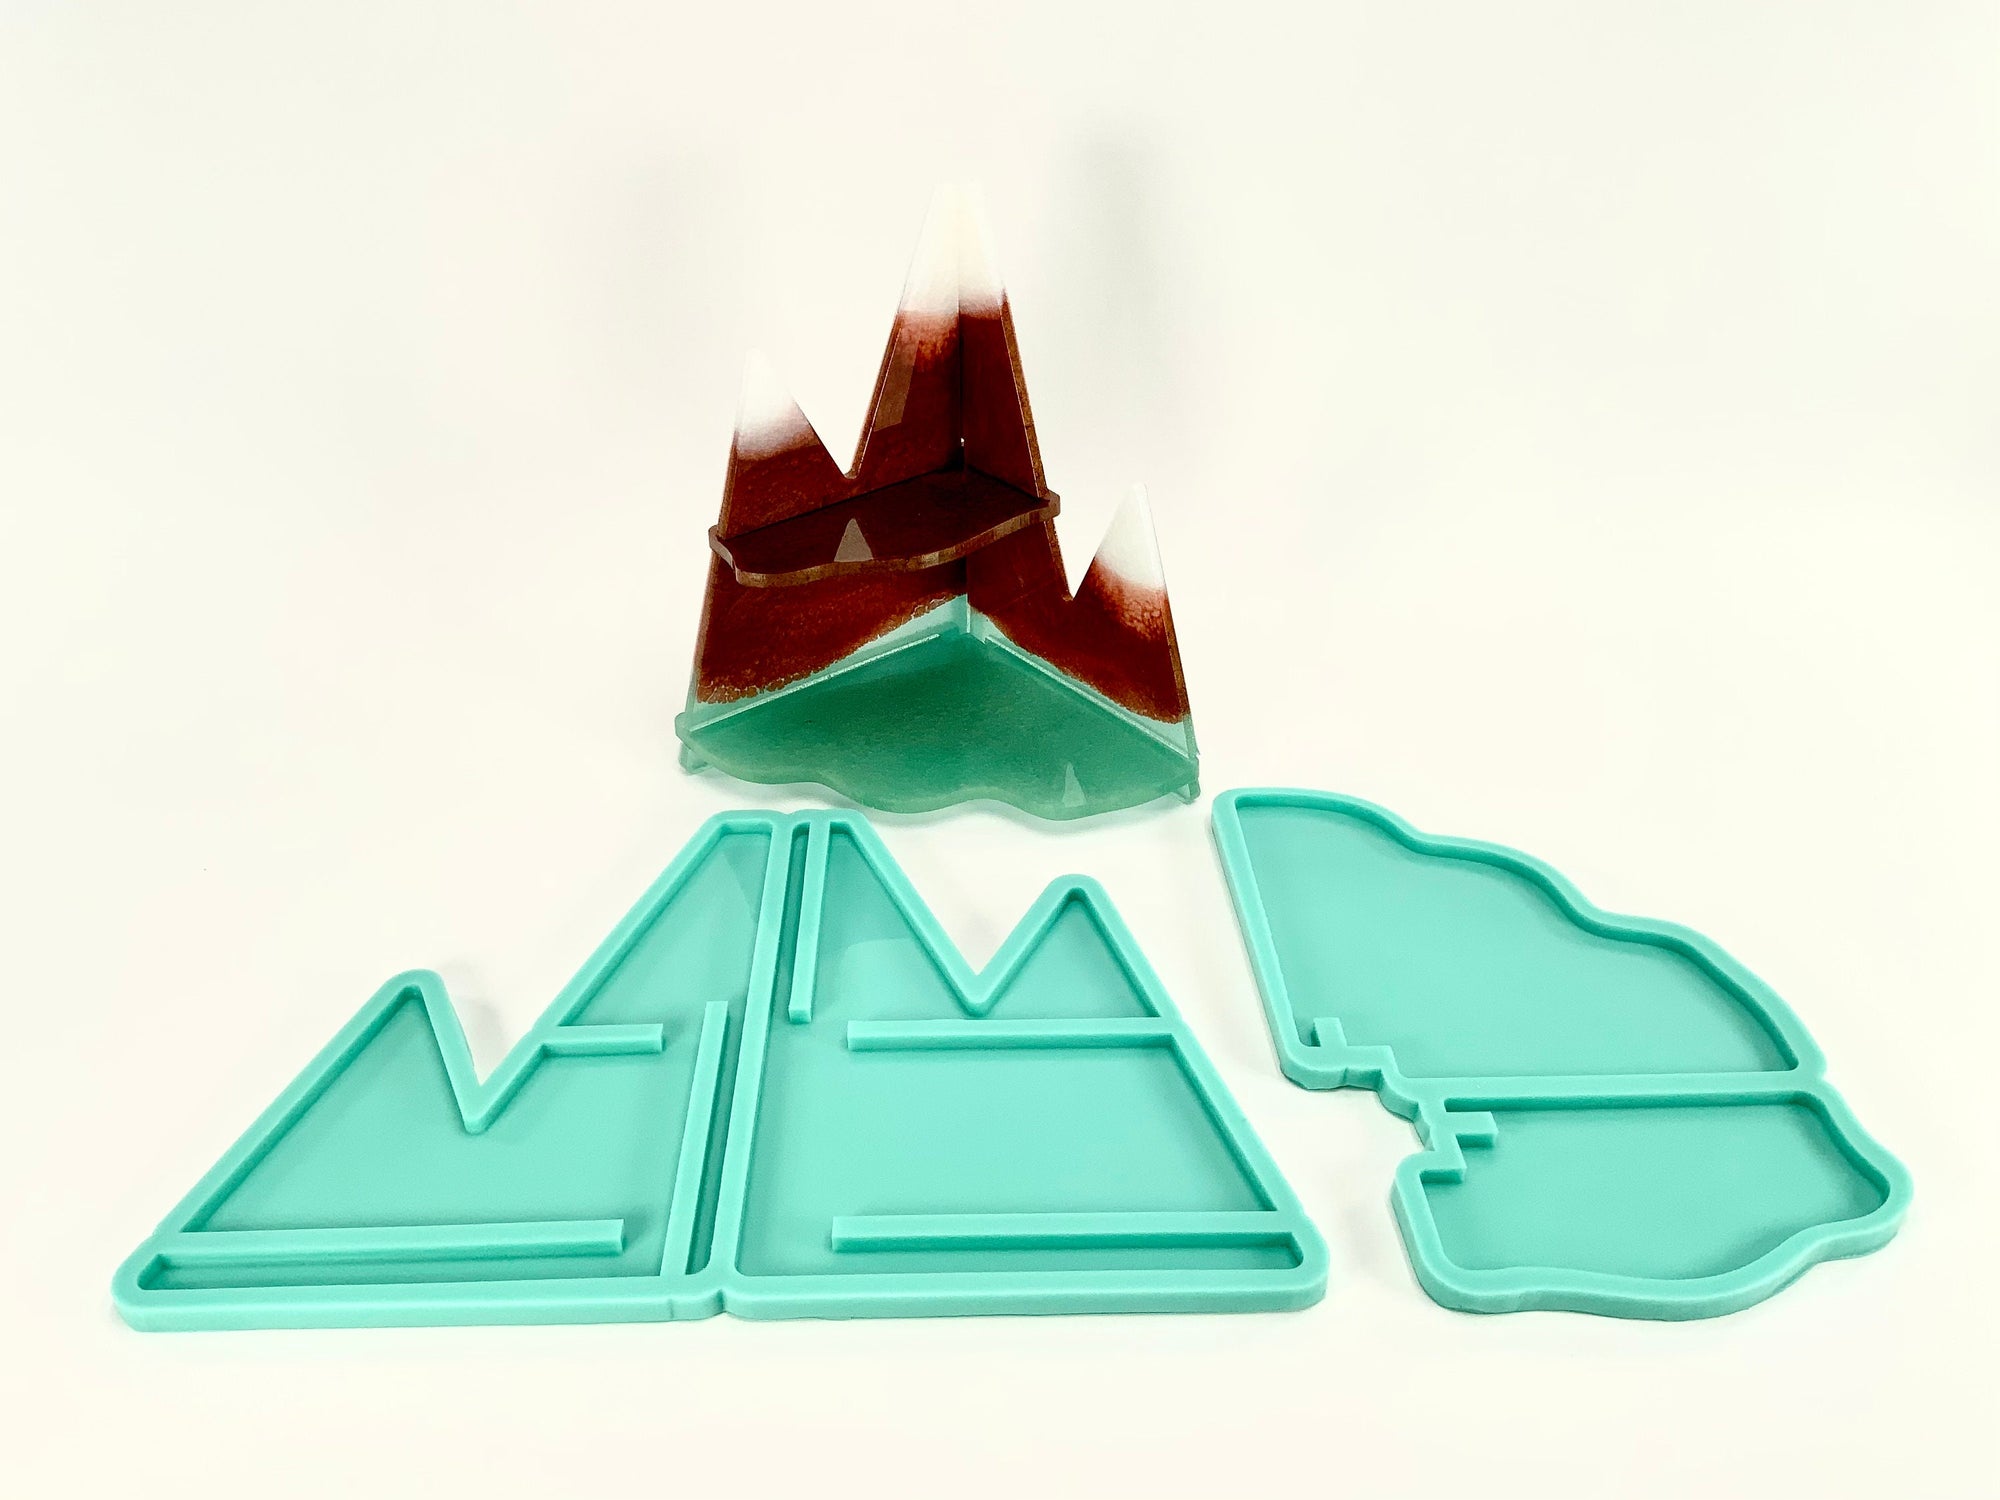 Mountain Corner Shelf Shiny Silicone Mold for Resin Crafting stand Functional Silicon Mould Shiney